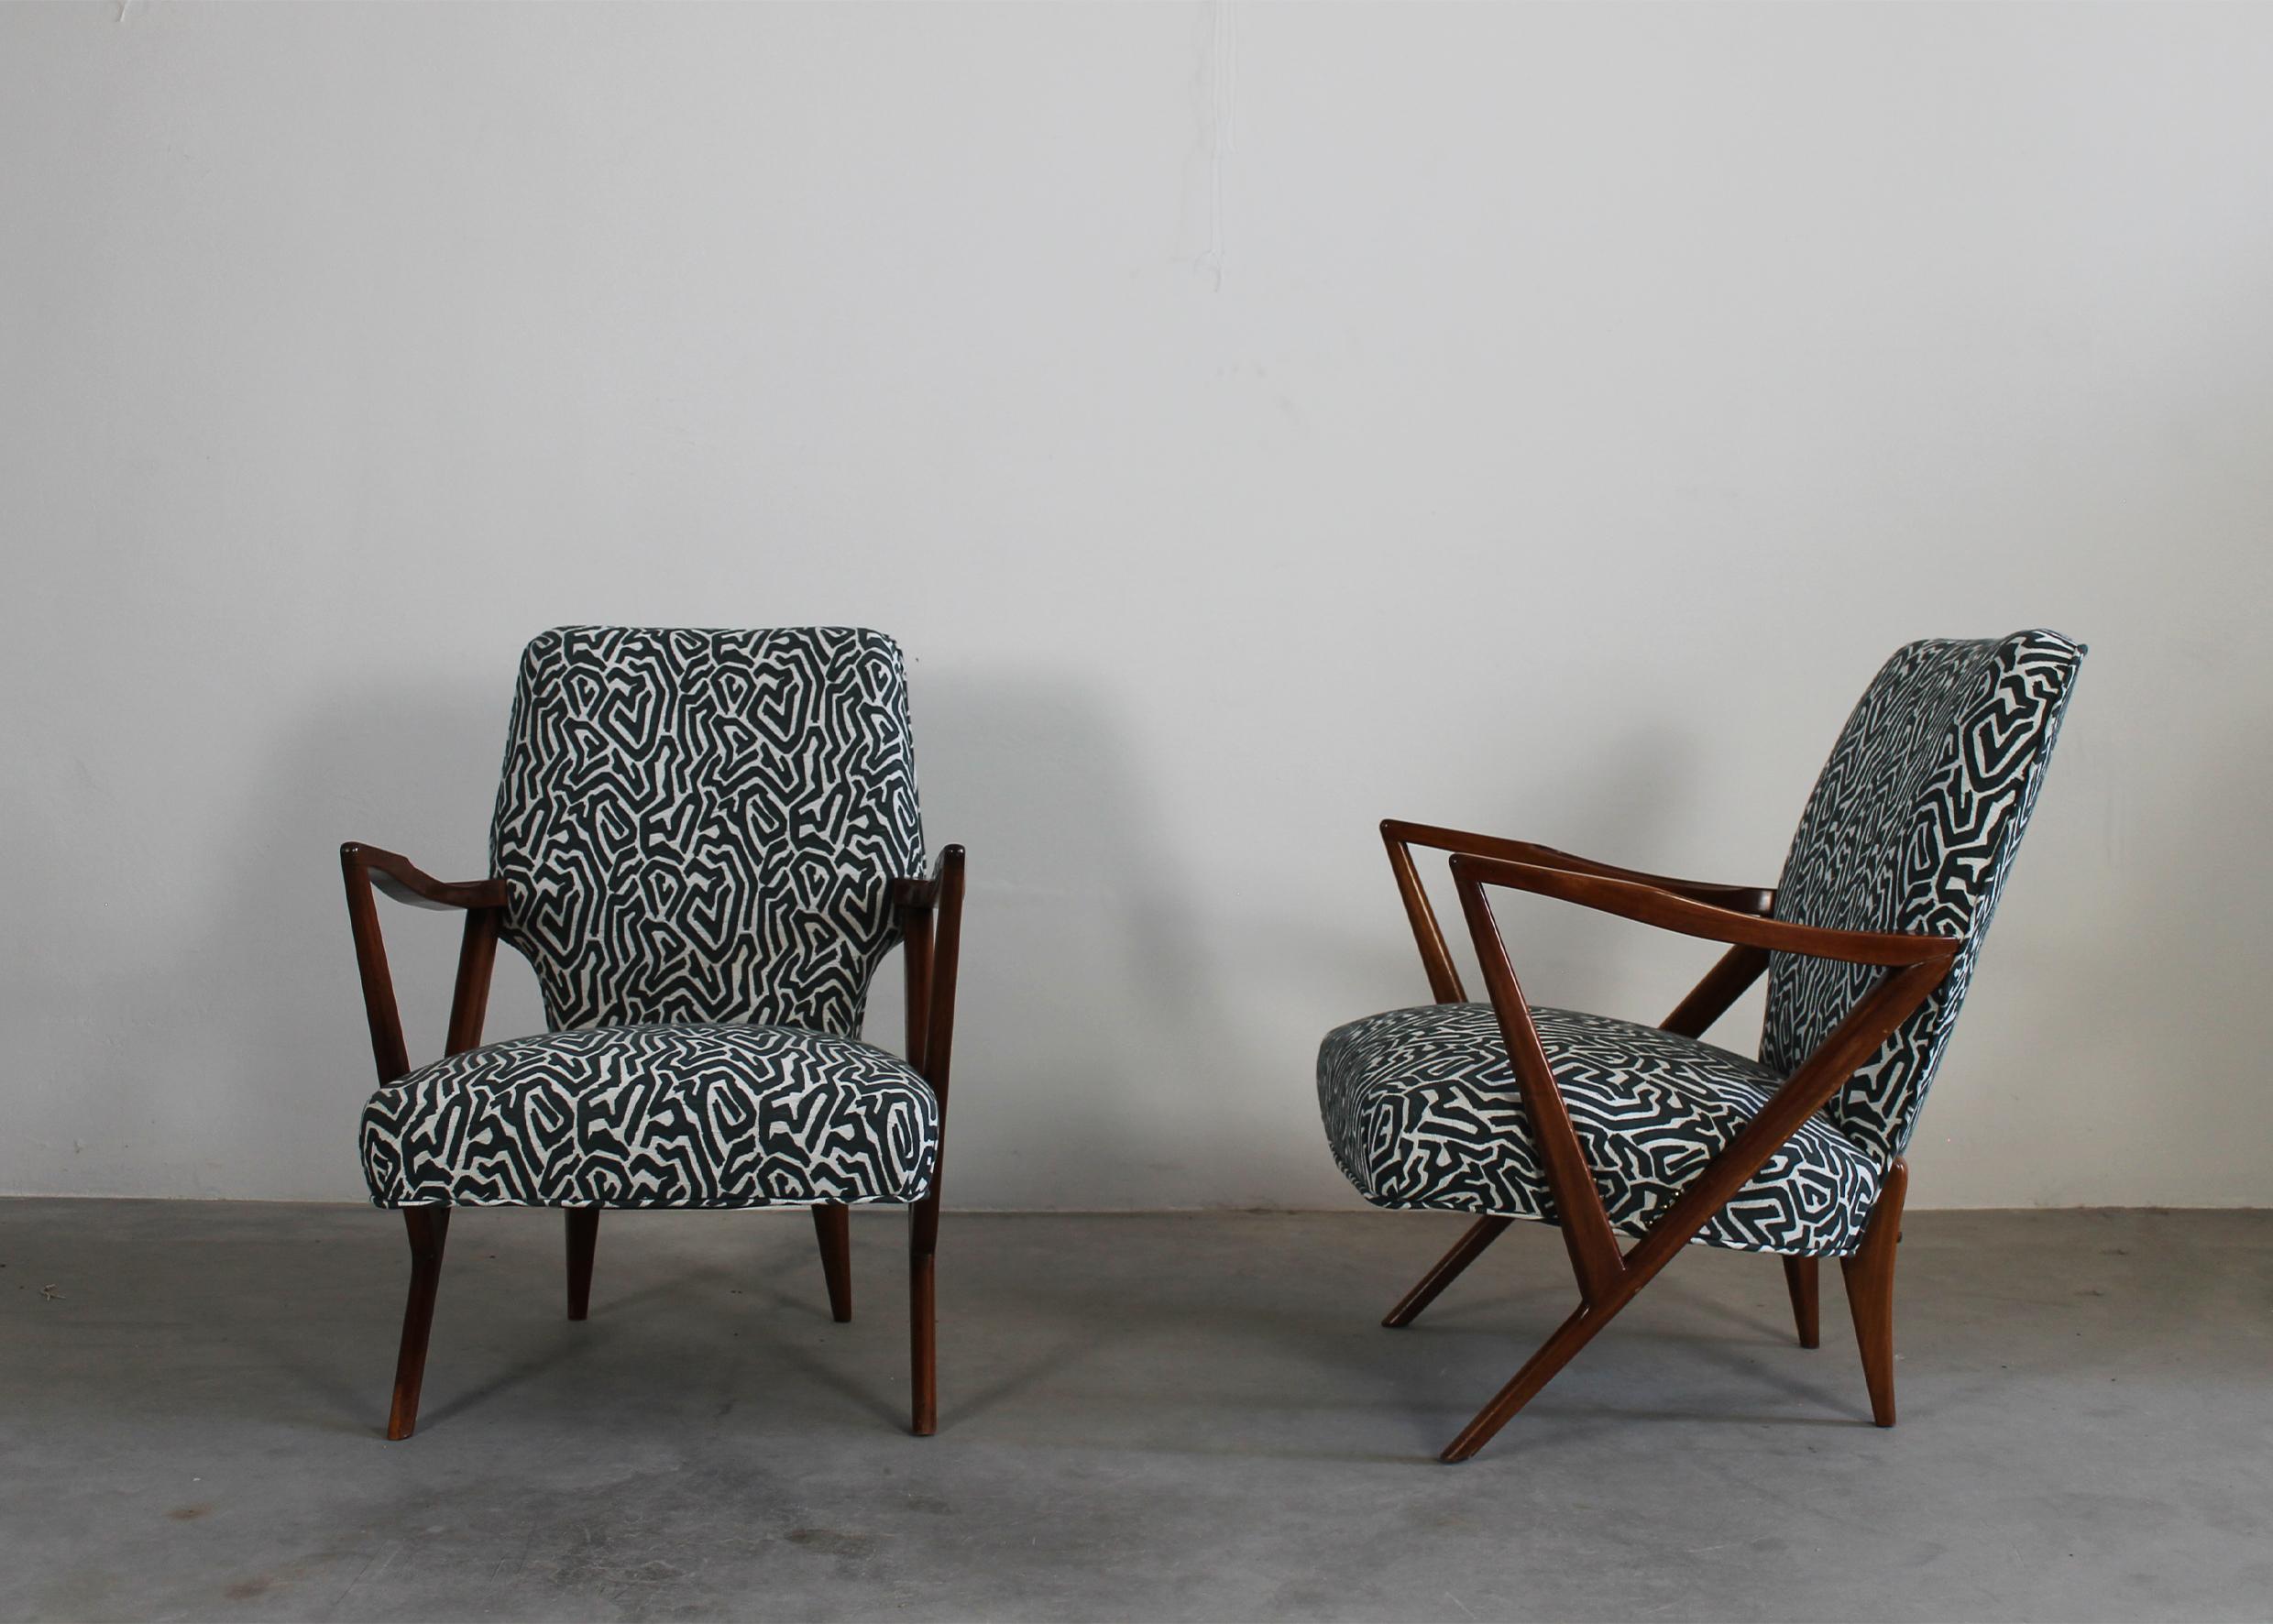 Brazilian Giuseppe Scapinelli Set of Two Armchairs in Walnut and Printed Fabric 1955